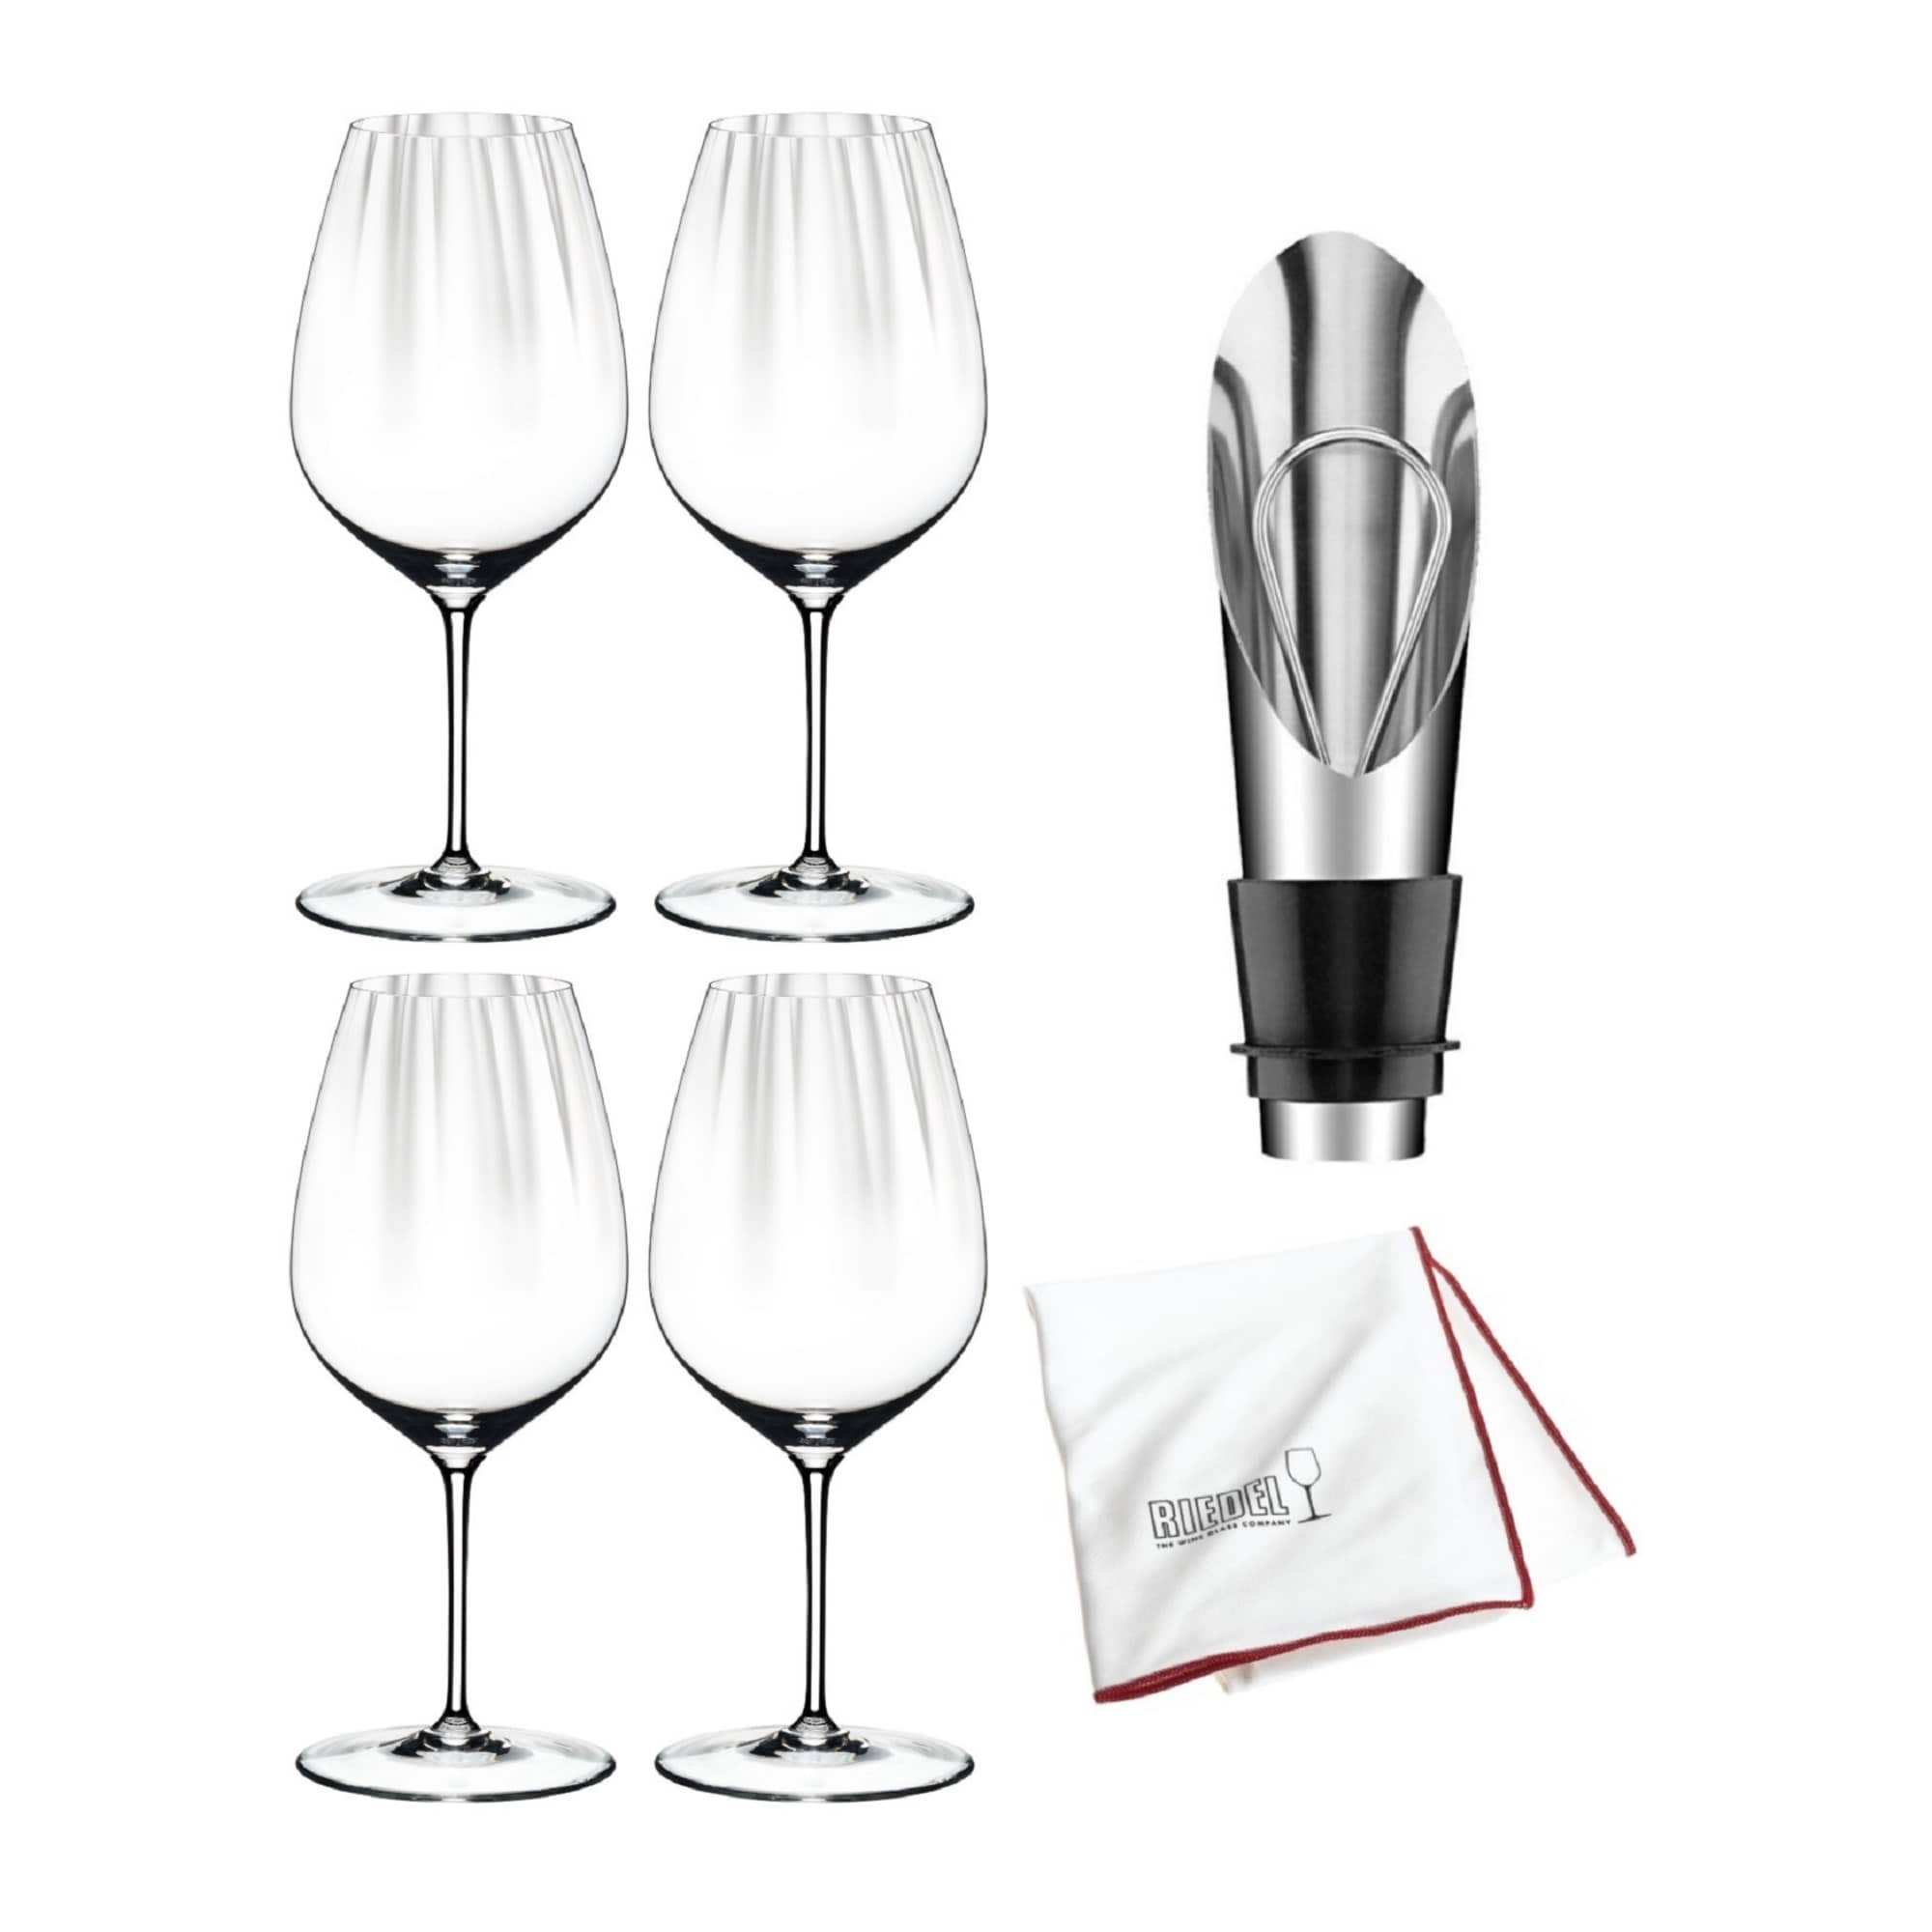 https://ak1.ostkcdn.com/images/products/is/images/direct/96728ee92f10ee2c91d0631e2f5335d480189588/Riedel-Performance-Wine-Glass-%28Cabernet%2C-4-Pk%29-with-Wine-Pourer-Bundle.jpg